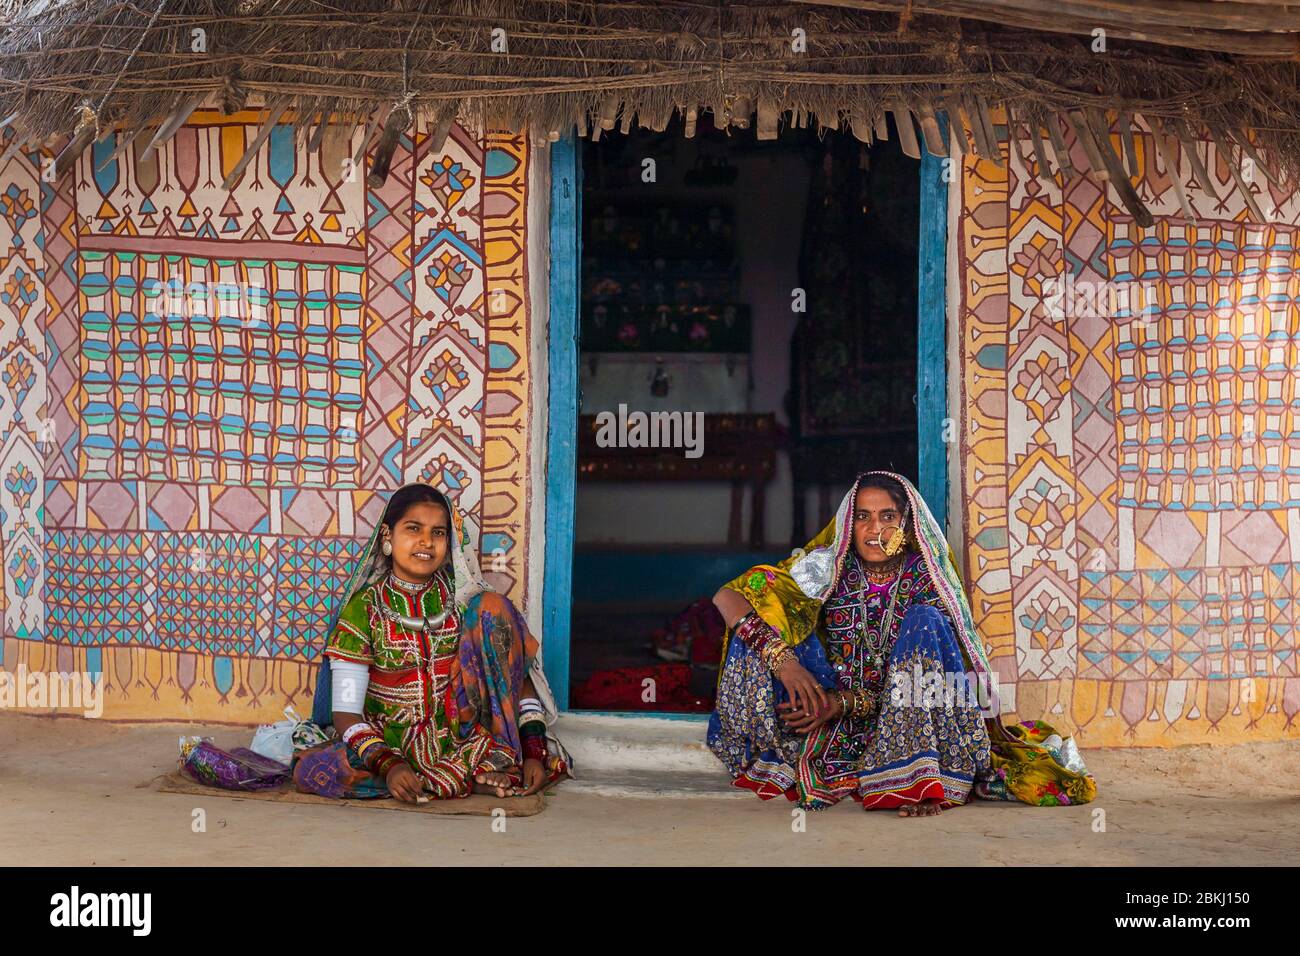 India, Gujarat State, Kutch region, Ludiya village, near Bhuj, Meghwal tribe women wearing traditional embroidered clothes in front of a decorated hut Stock Photo